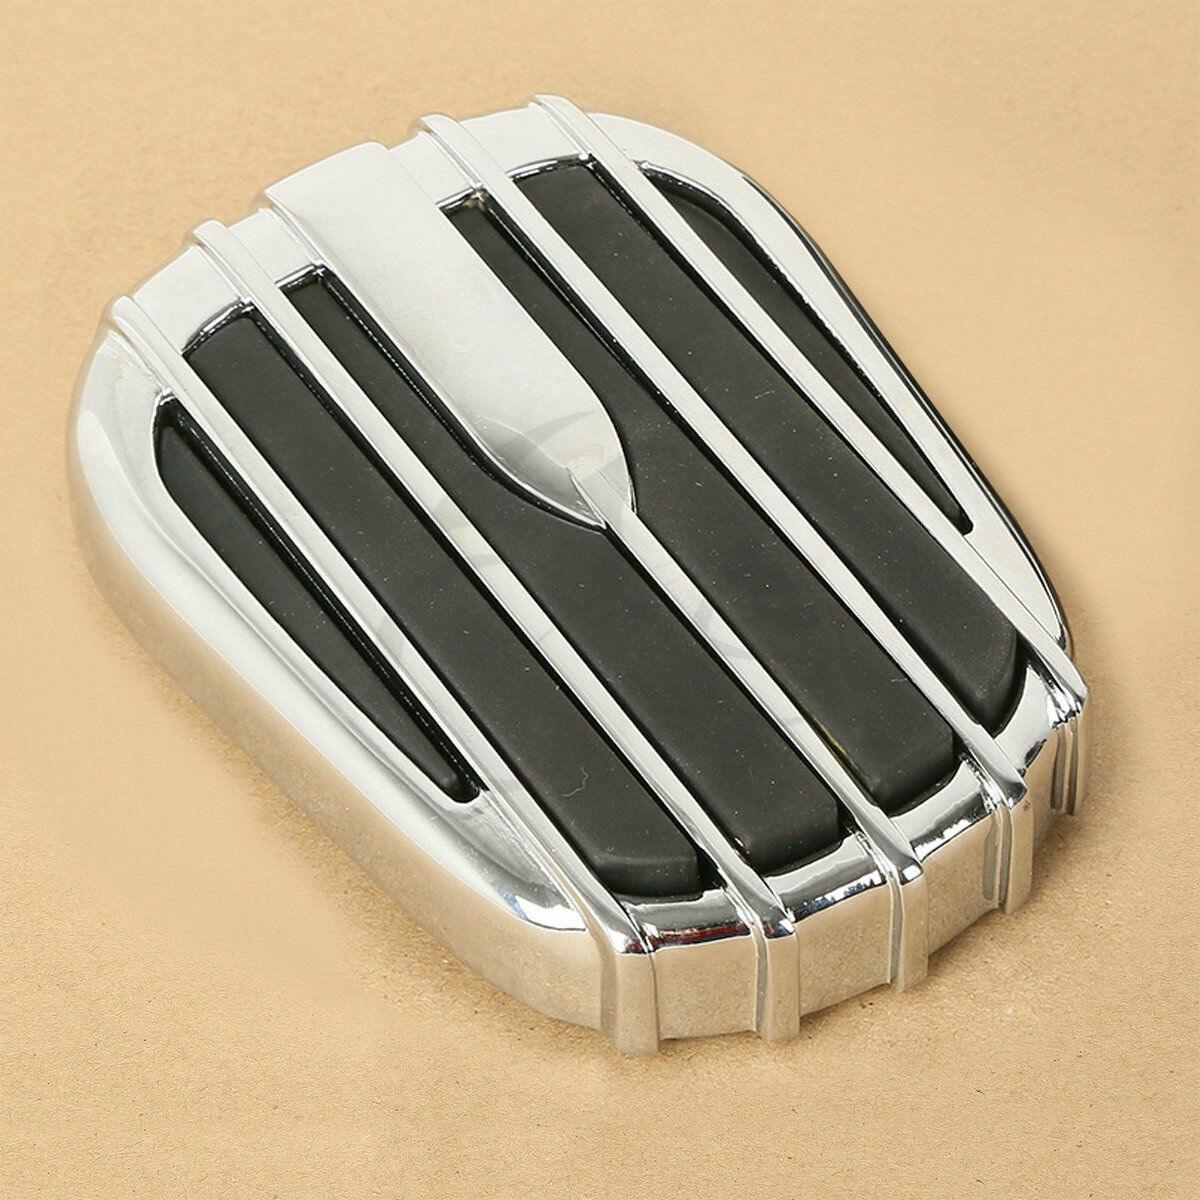 Aluminum Brake Pedal Pad Cover Fit For Harley Touring Street Road Glide 80-21 - Moto Life Products